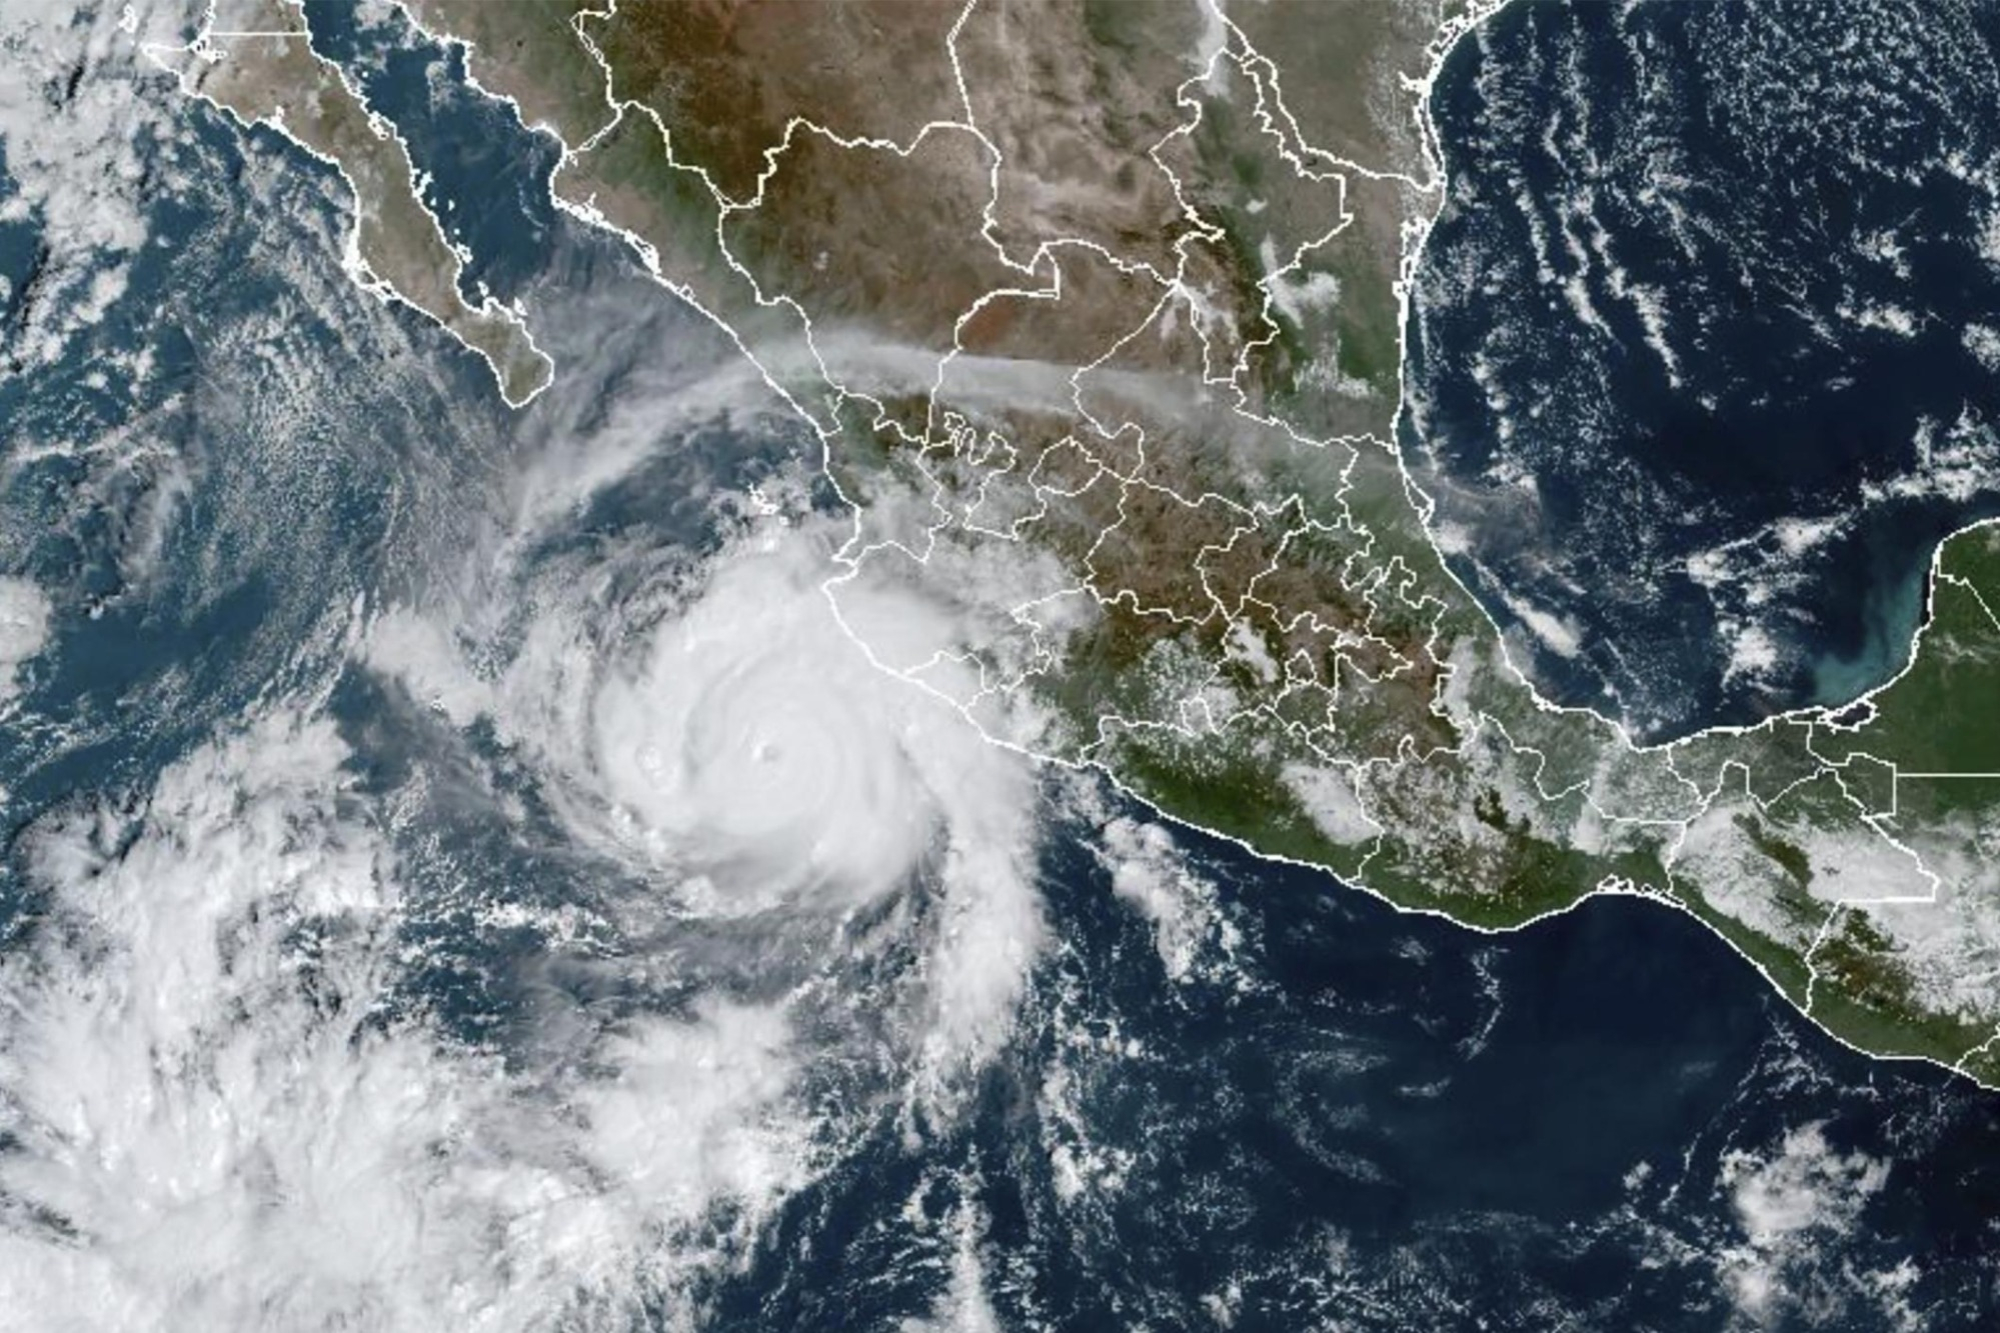 Category 3 Hurricane Roslyn hit Mexico with landslides, flash flooding, and strong winds